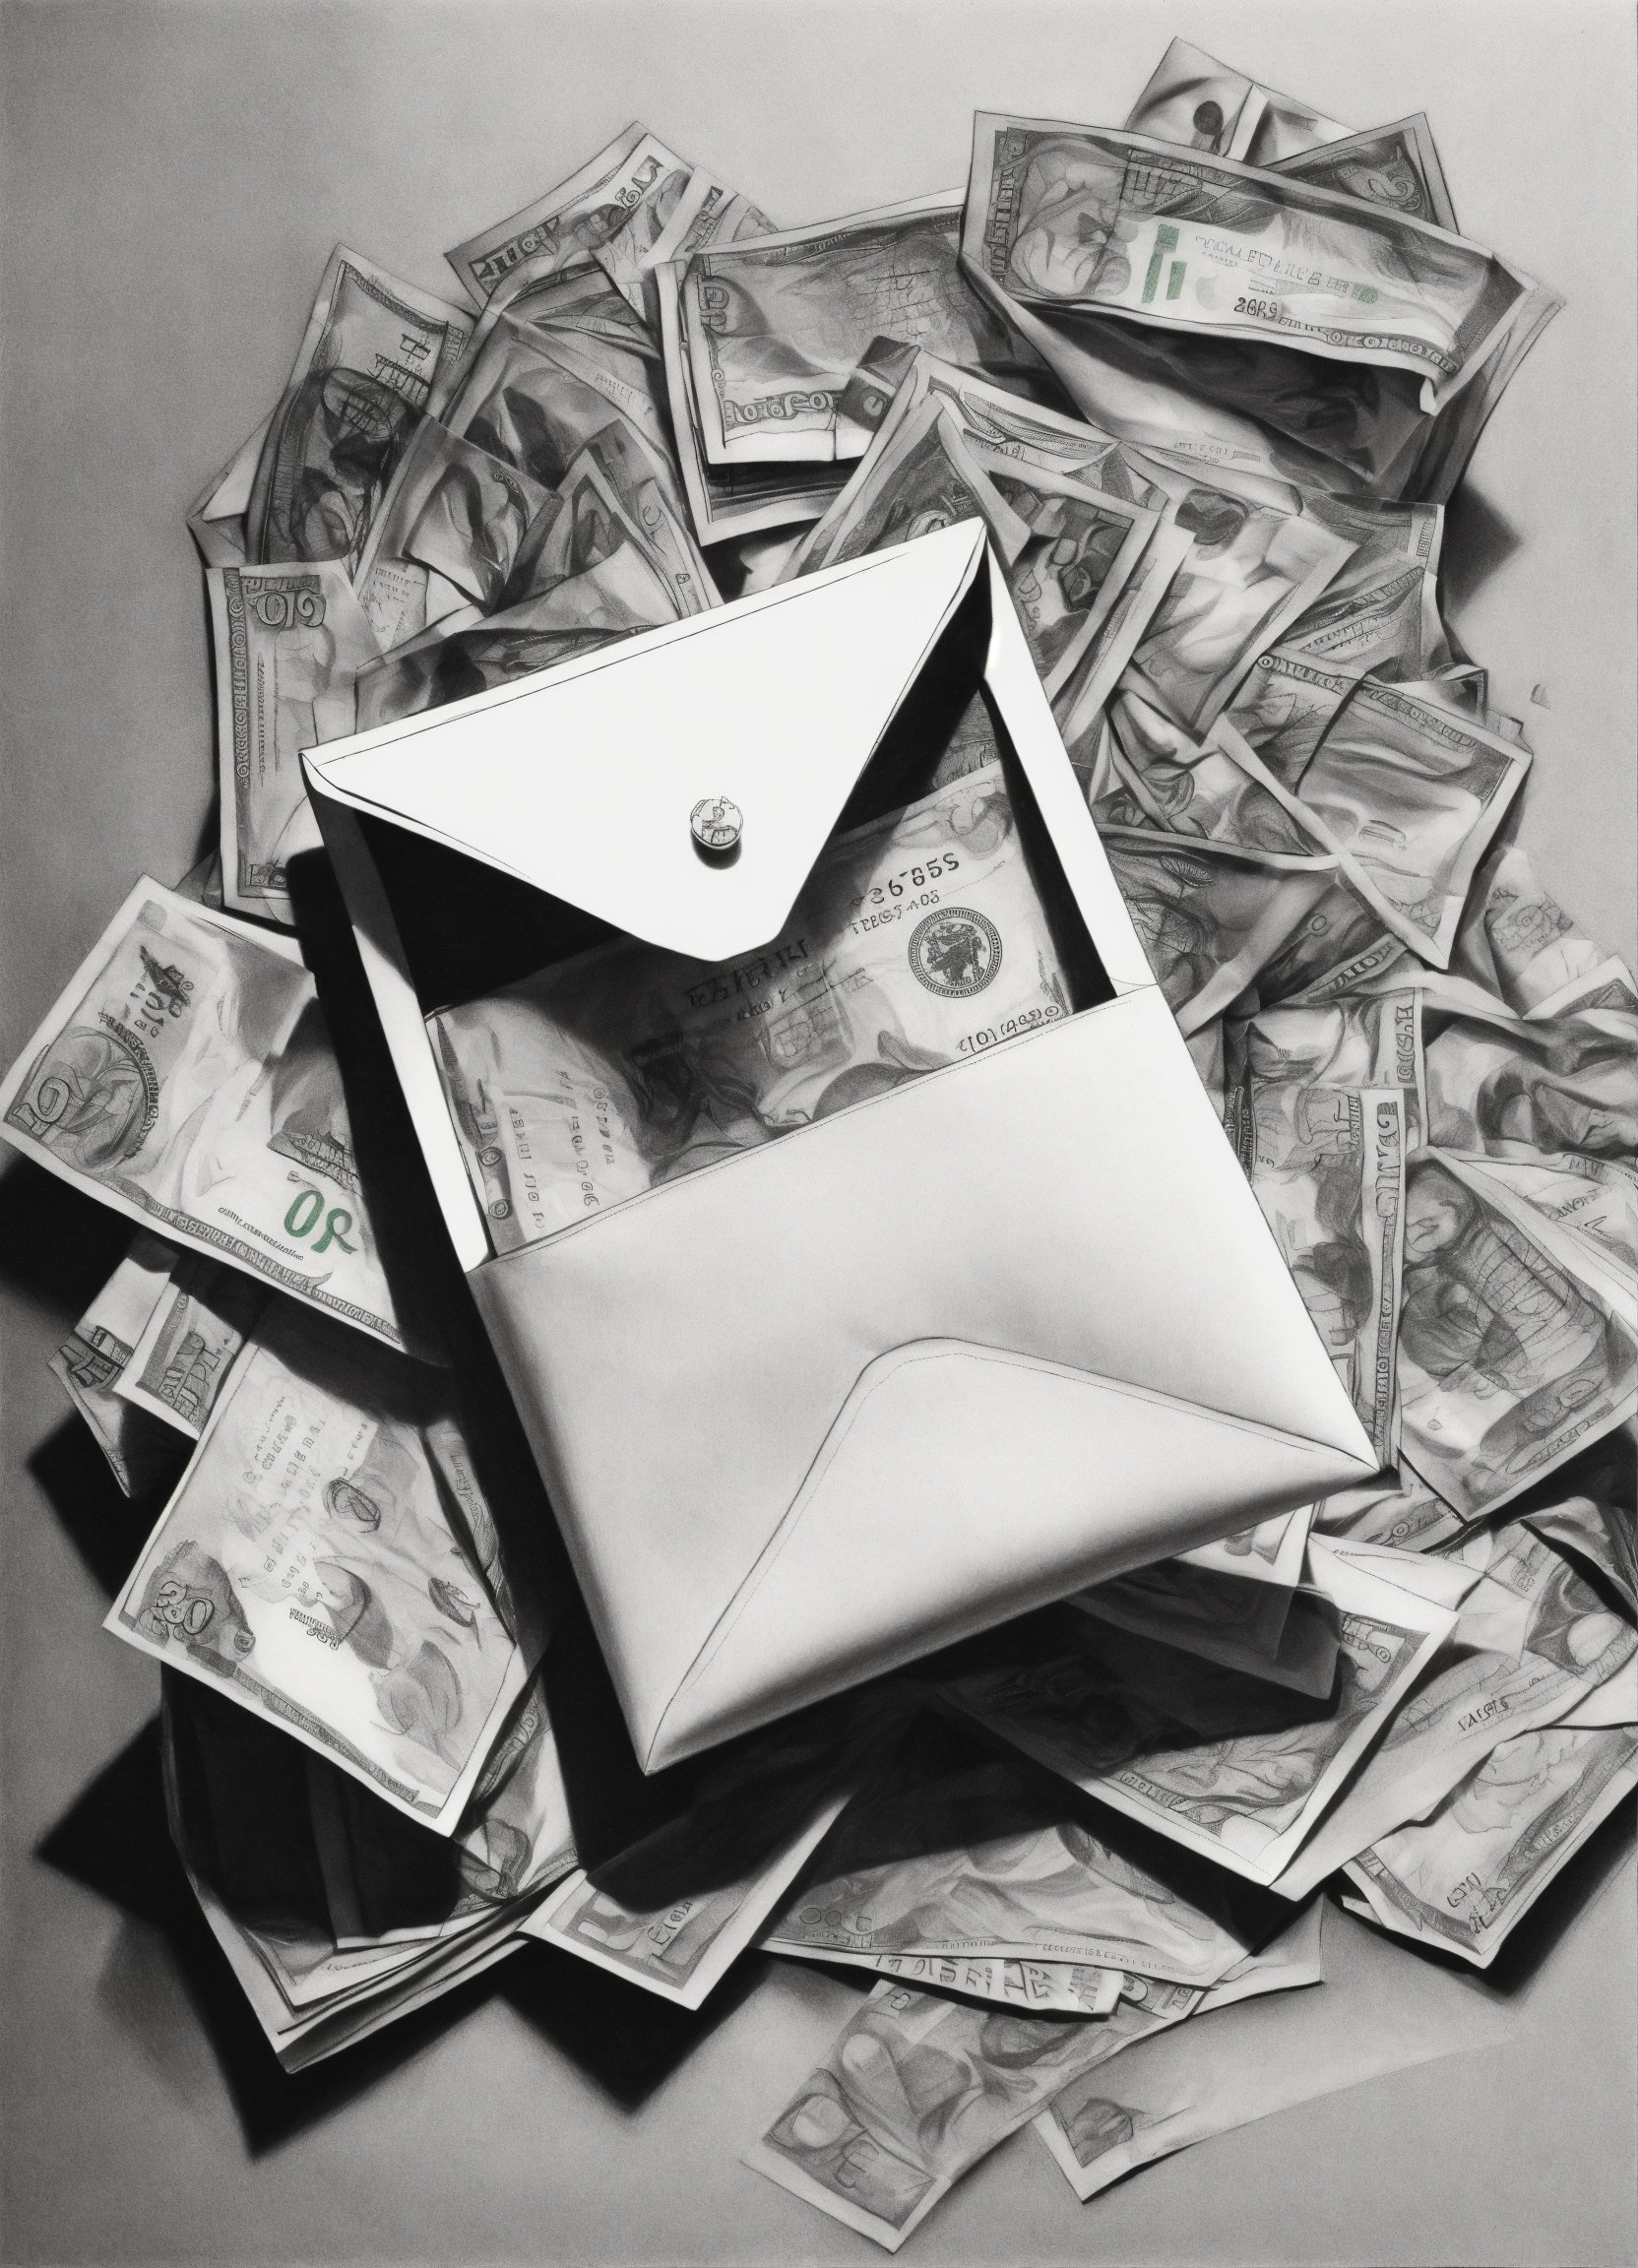 The Envelope System: An Effective Method of Budgeting or a Model to Control Your Finances